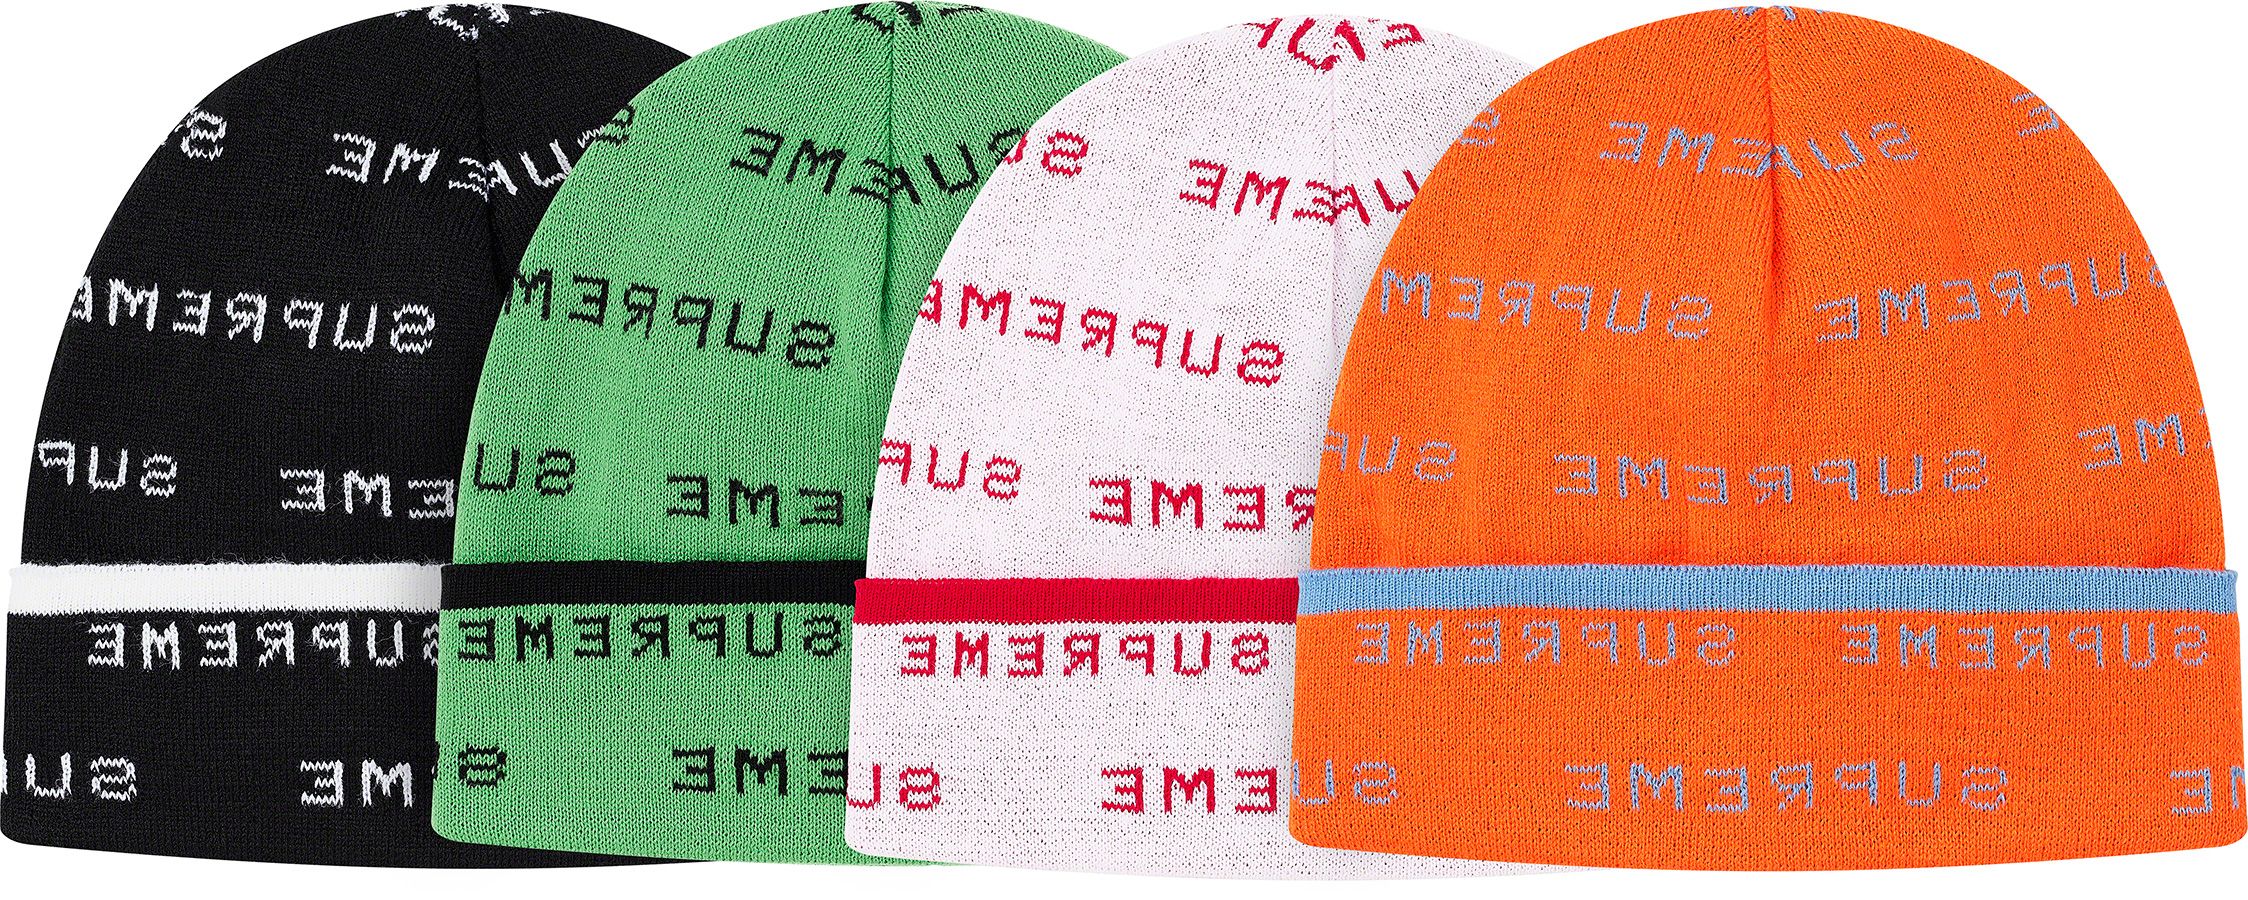 Splatter Dyed Beanie - Spring/Summer 2020 Preview – Supreme